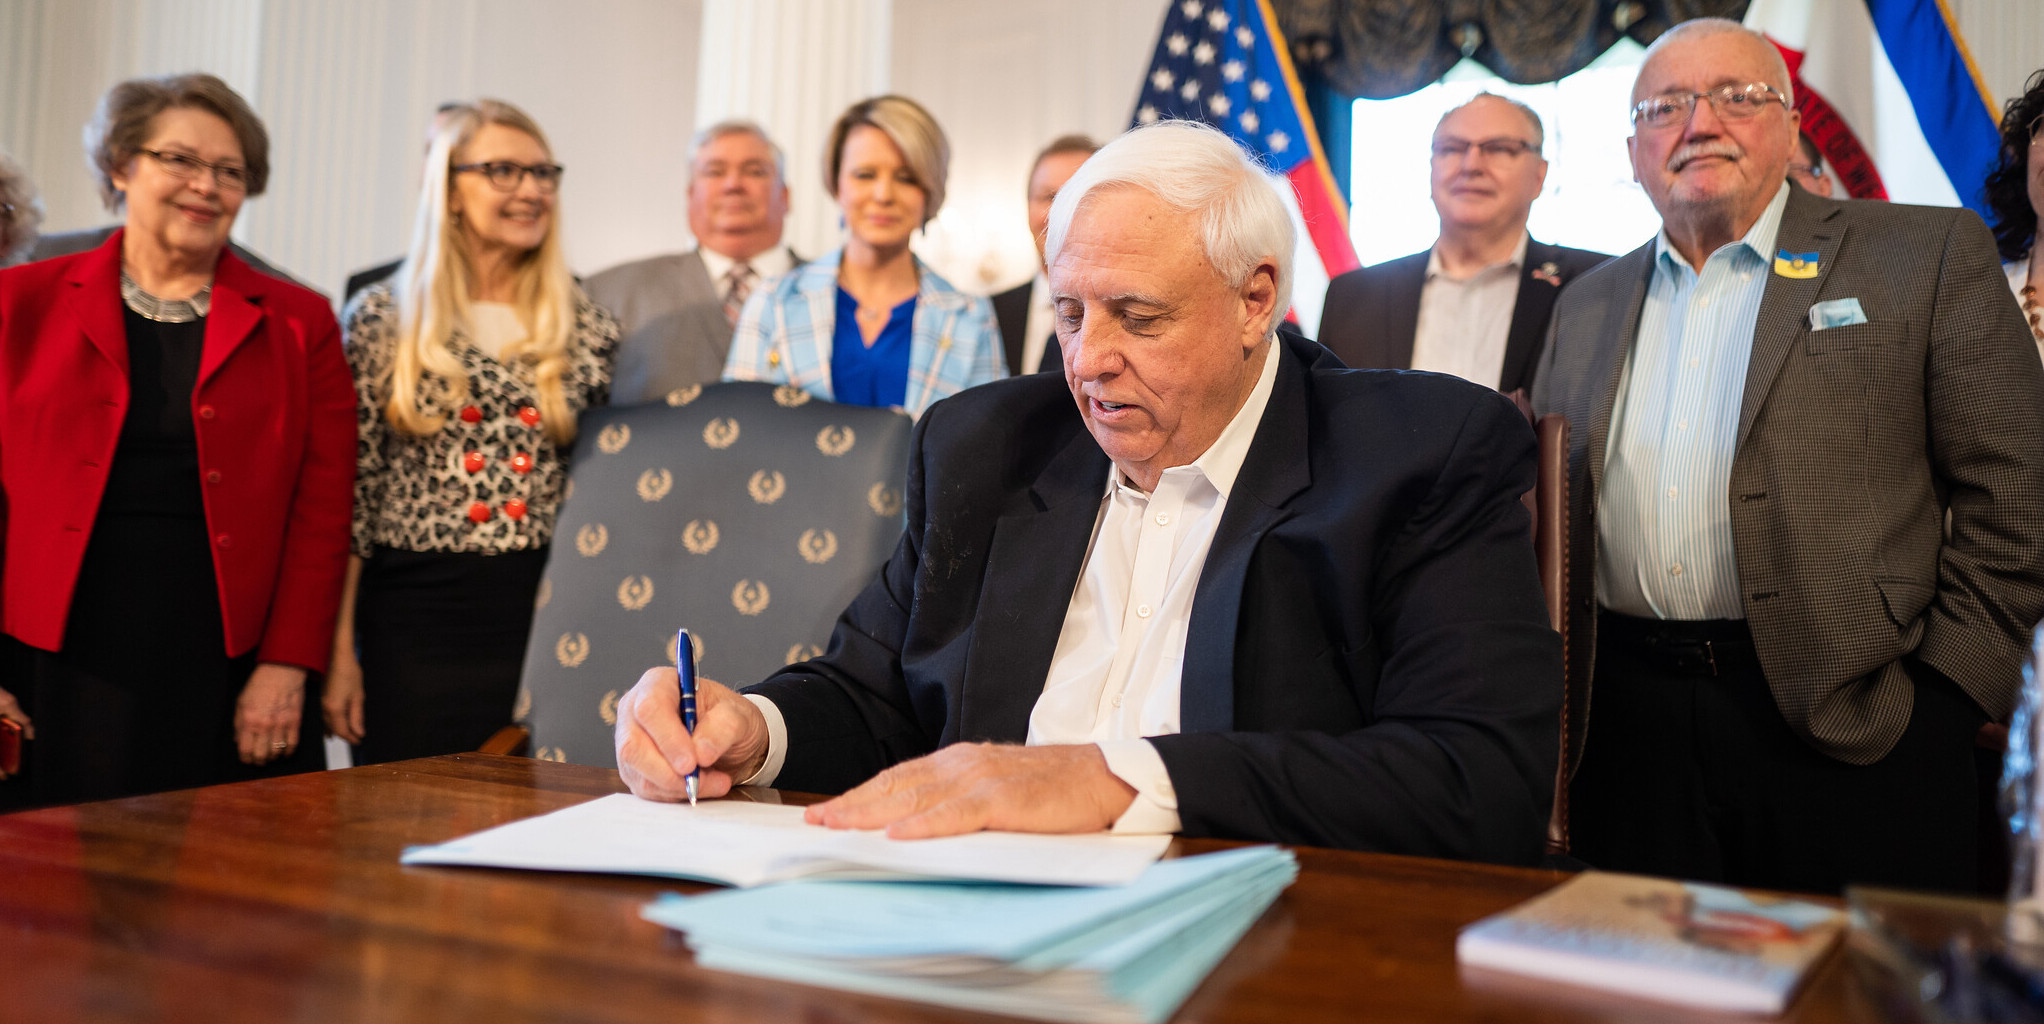 West Virginia governor signs bill banning abortions based on disability